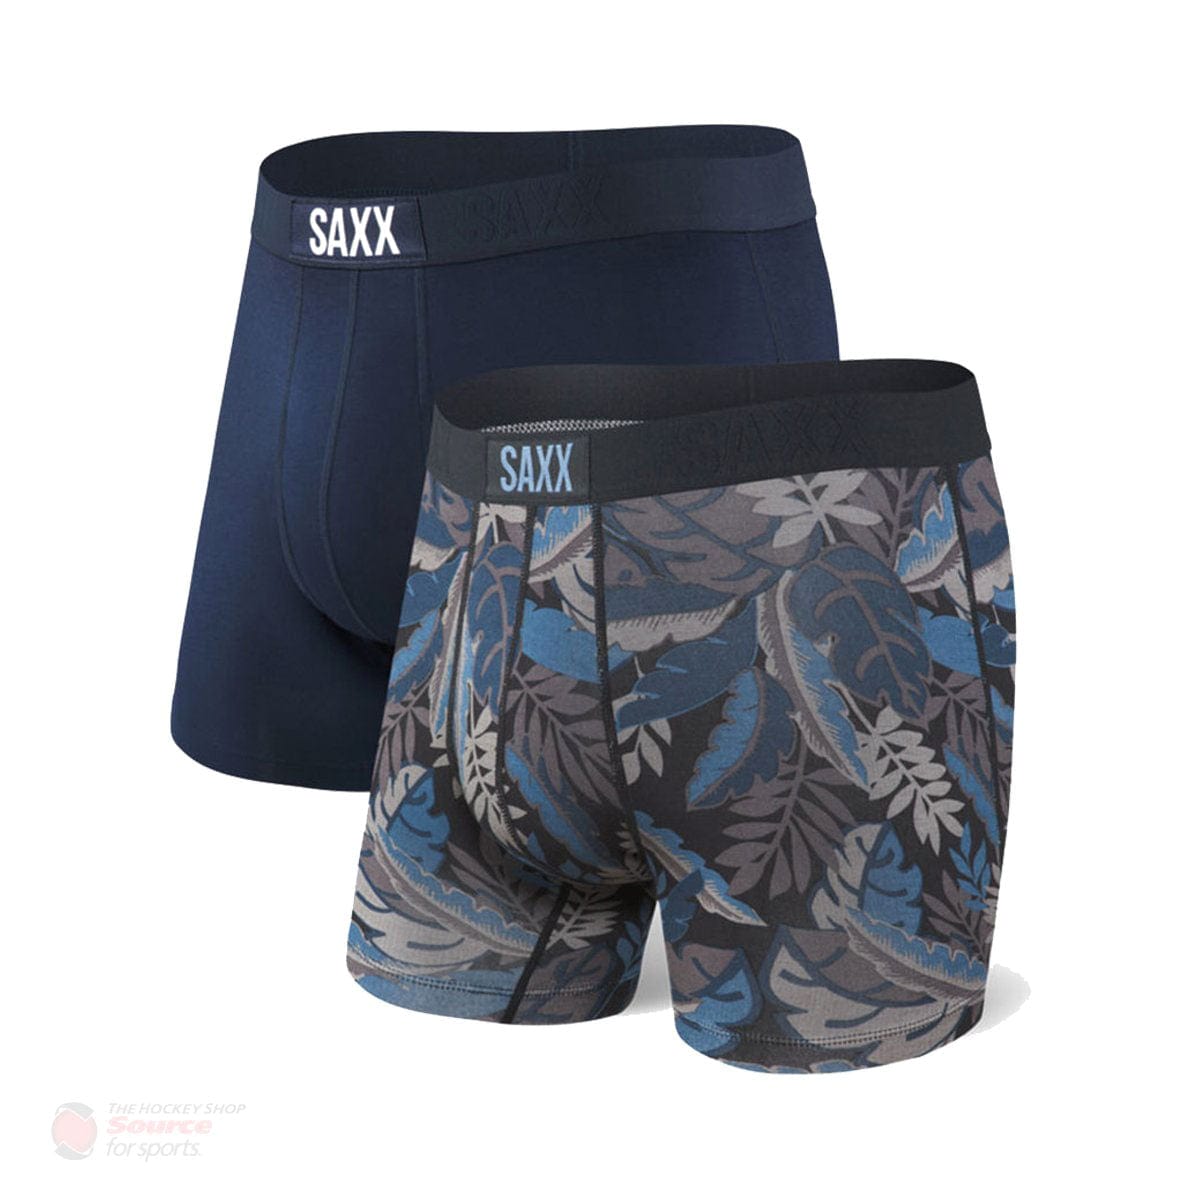 Saxx Vibe Boxers - Navy / Jungle (2 Pack)